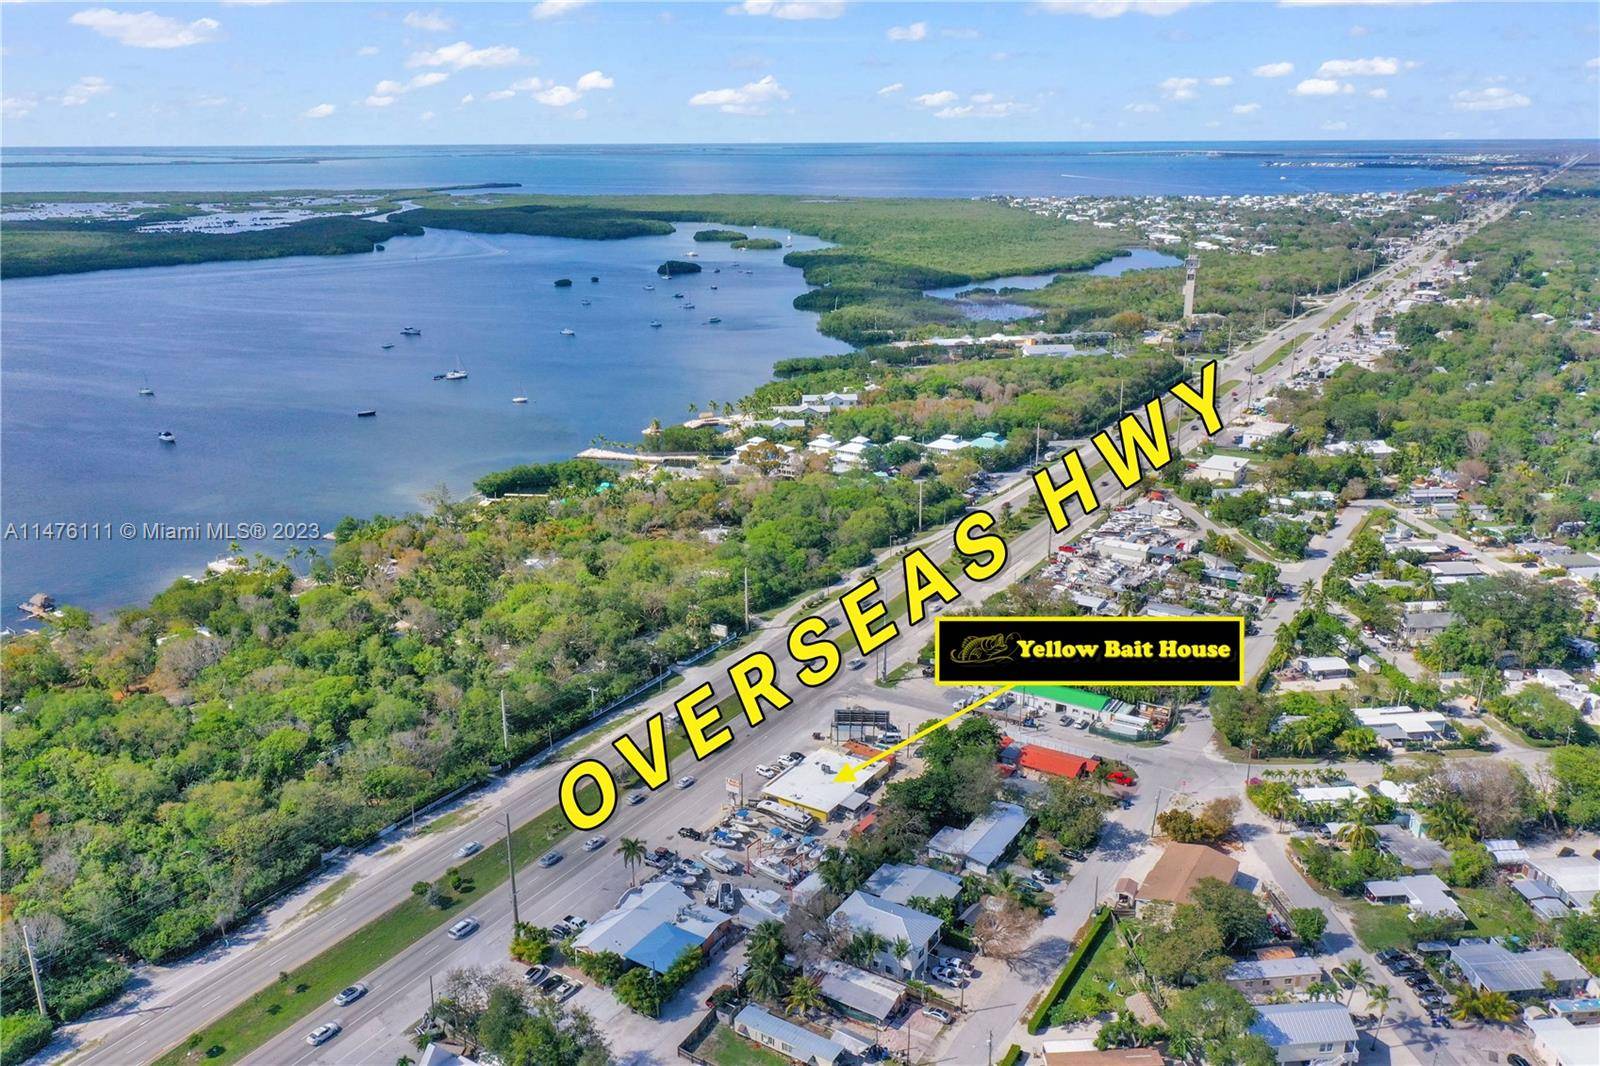 This remarkable 4. 75 million investment includes the real estate and the renowned Yellow Bait House, a well established bait and tackle business with deep roots in Key Largo since ...